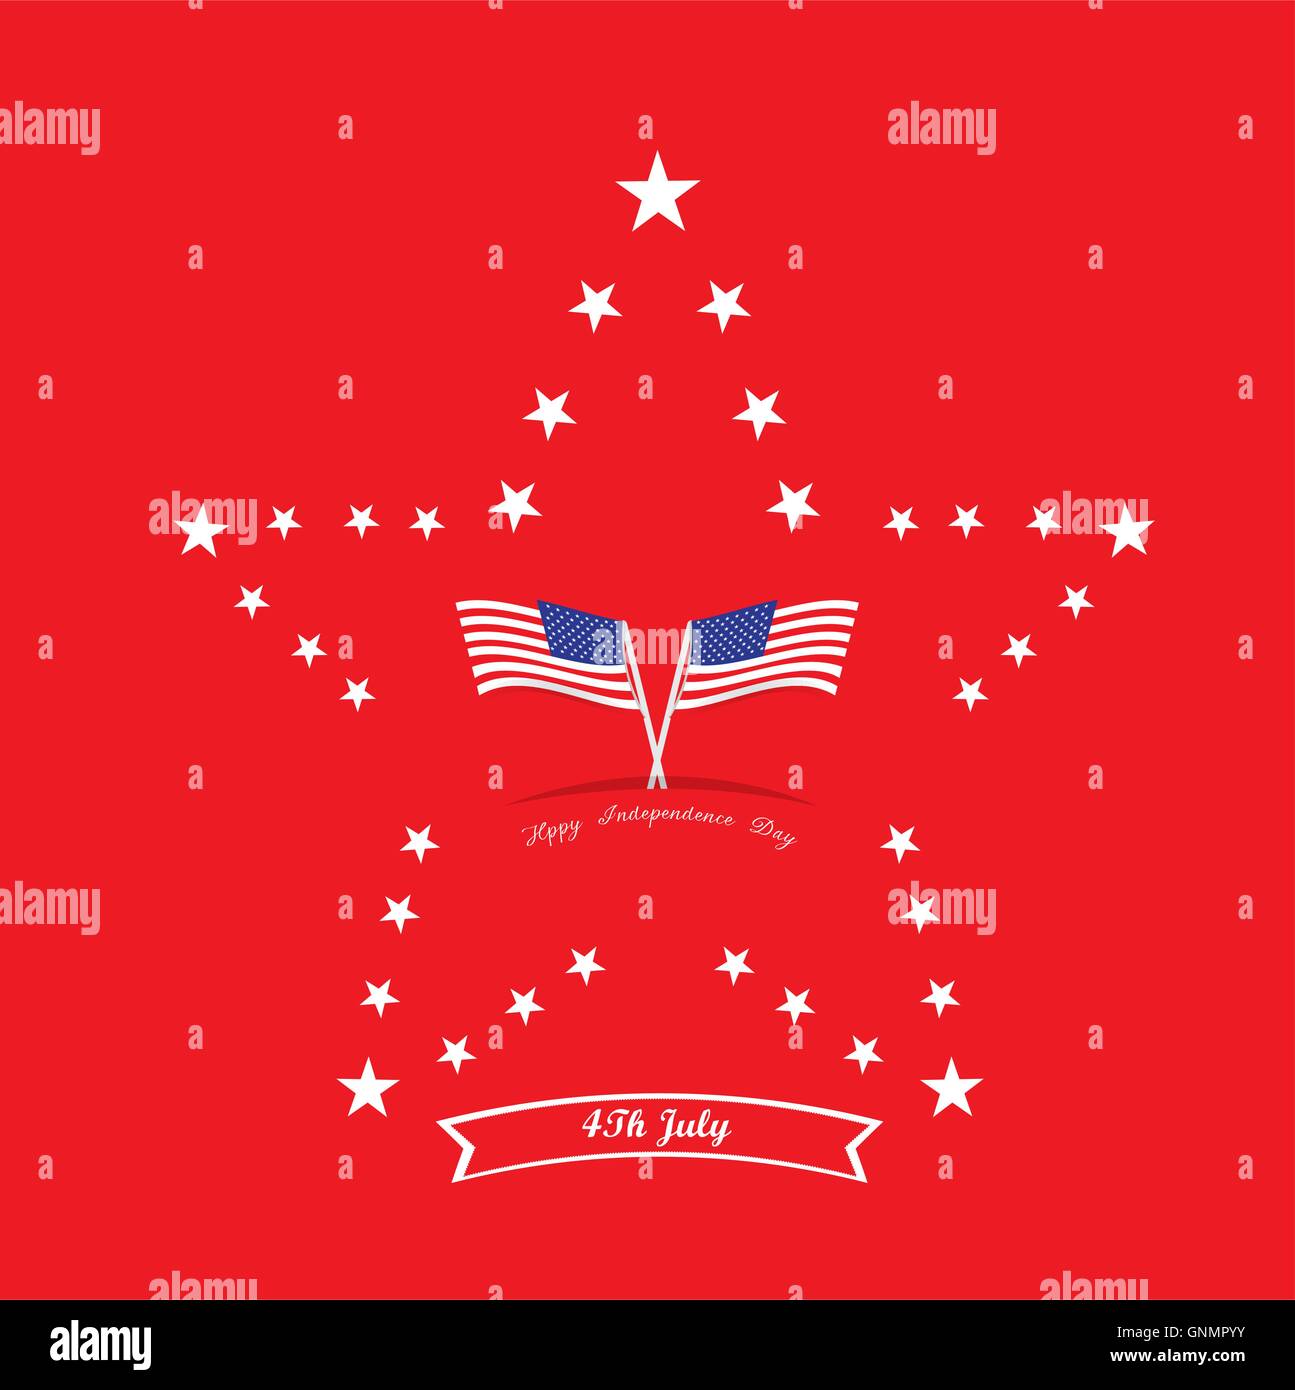 Isolated star composed by other stars and a pair of flags on a red background for independence day celebrations Stock Vector